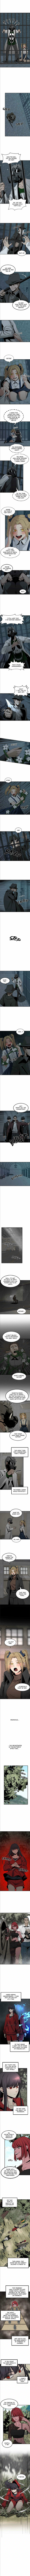 Hero Killer Chapter 39 page 1